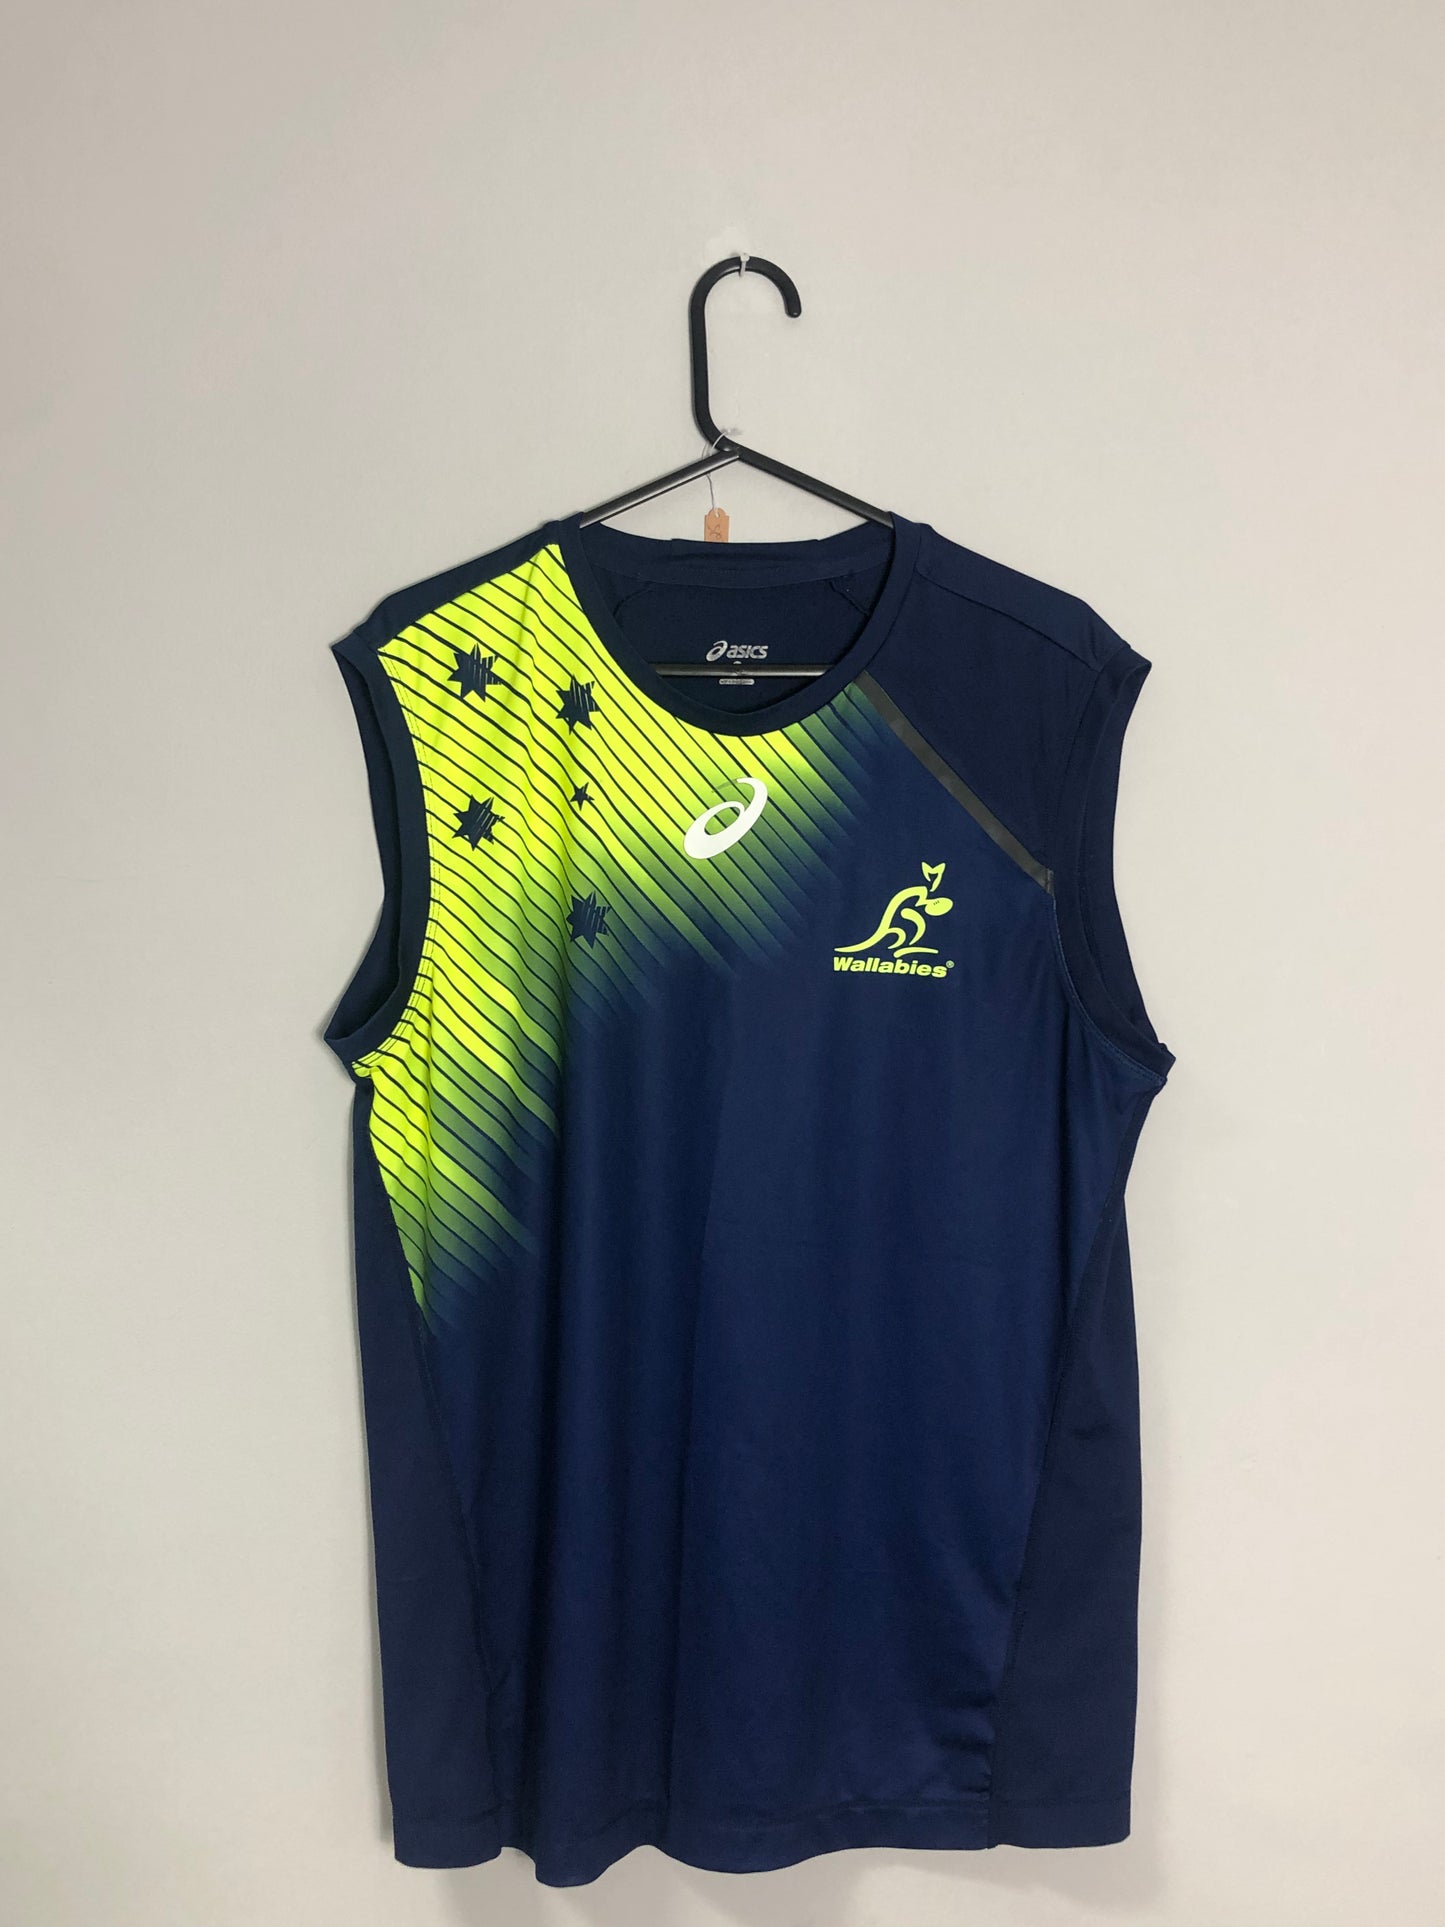 Australia Rugby Vest - 38” Chest - Small